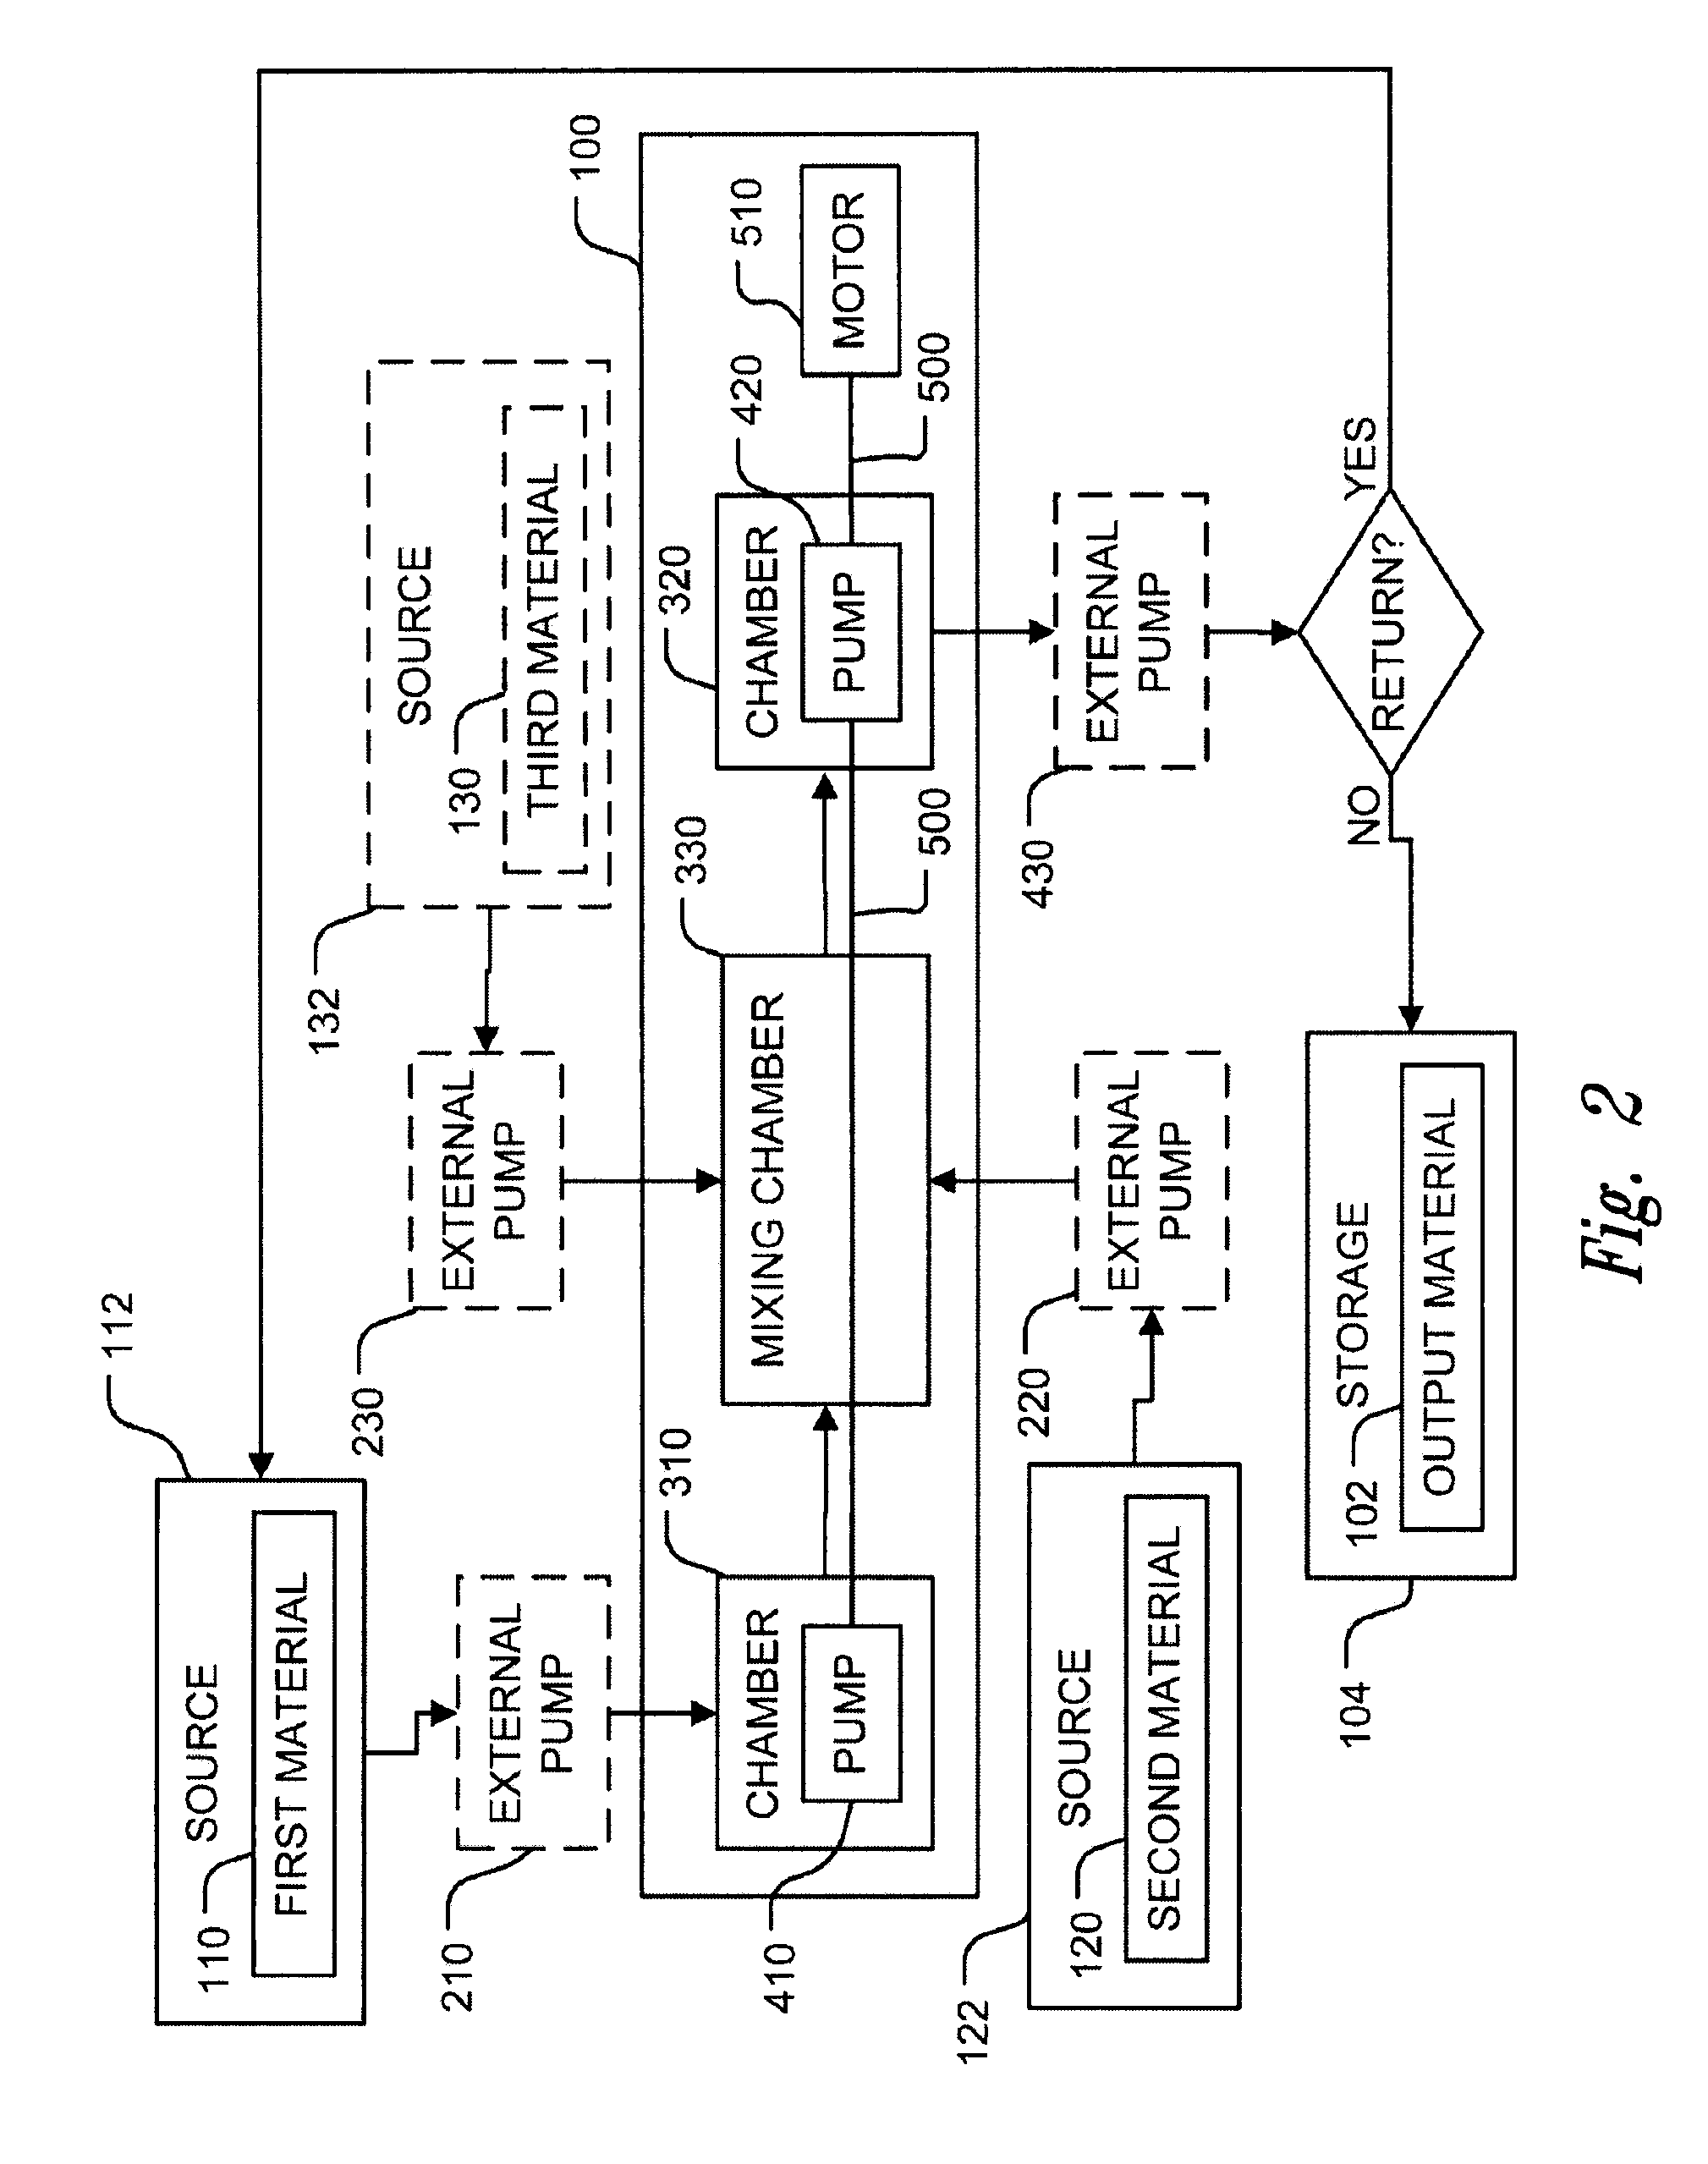 Methods of therapeutic treatment of eyes and other human tissues using an oxygen-enriched solution